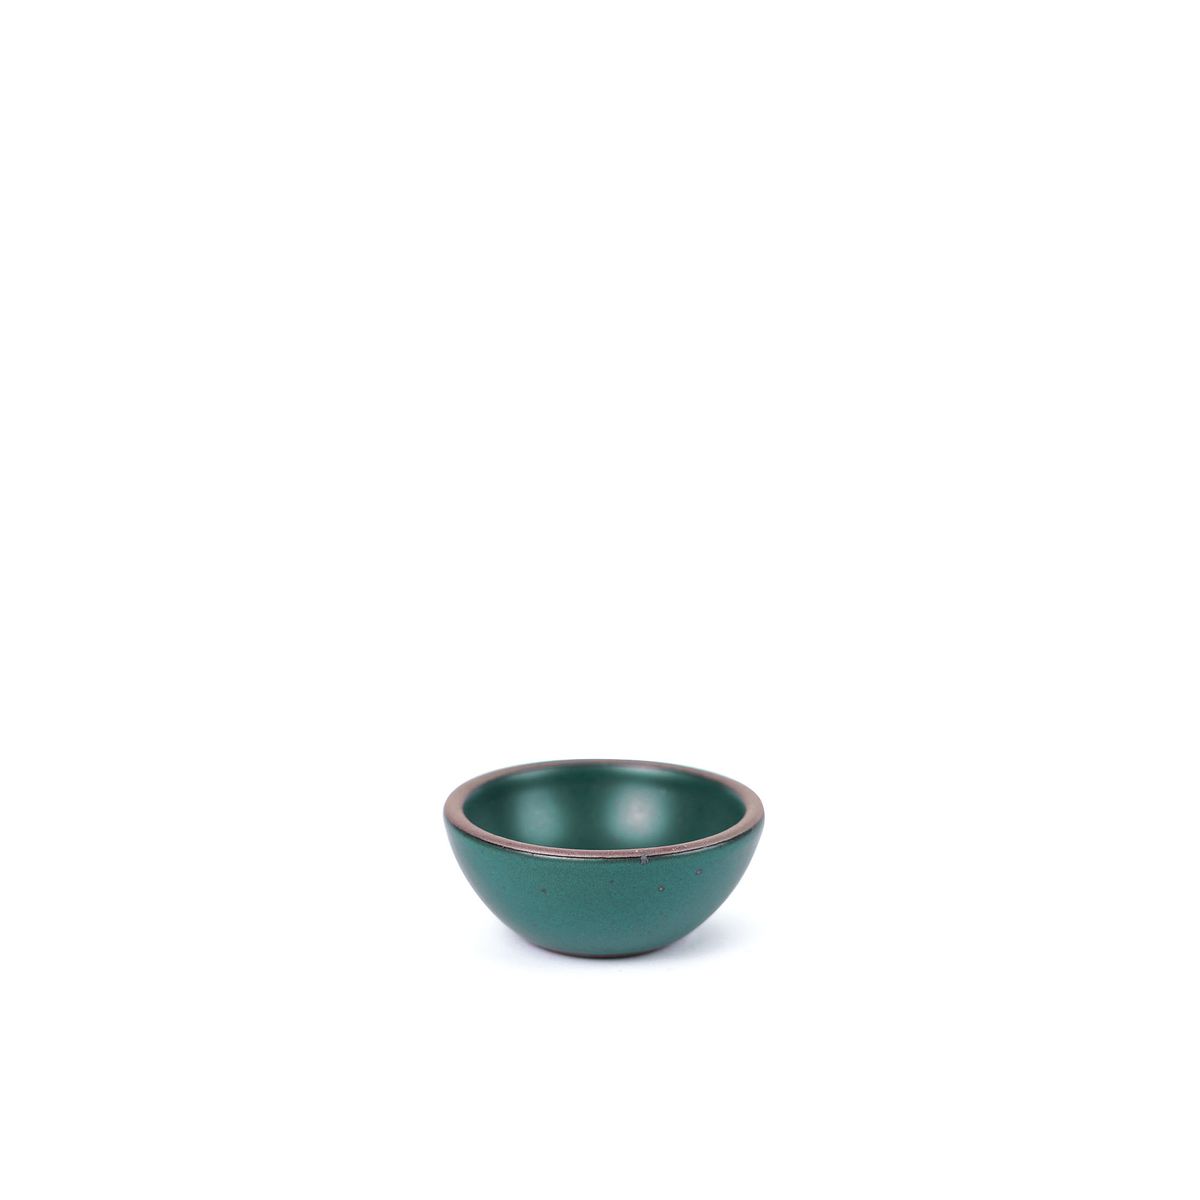 A tiny rounded ceramic bowl in a deep dark teal color featuring iron speckles and an unglazed rim